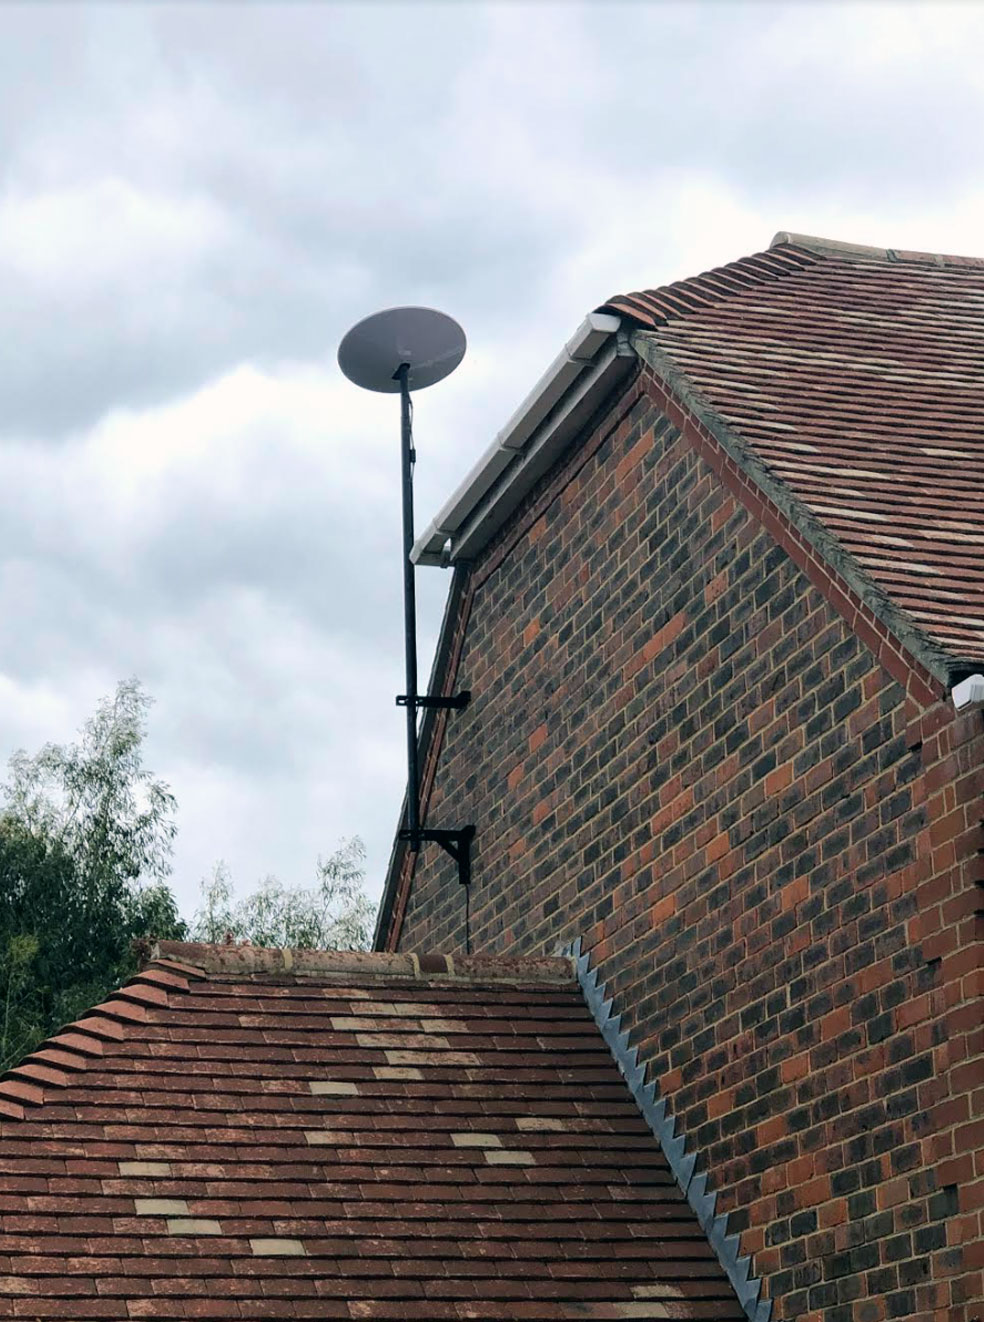 Professional satellite installation in Bagshot, Surrey using our own manufactured parts.